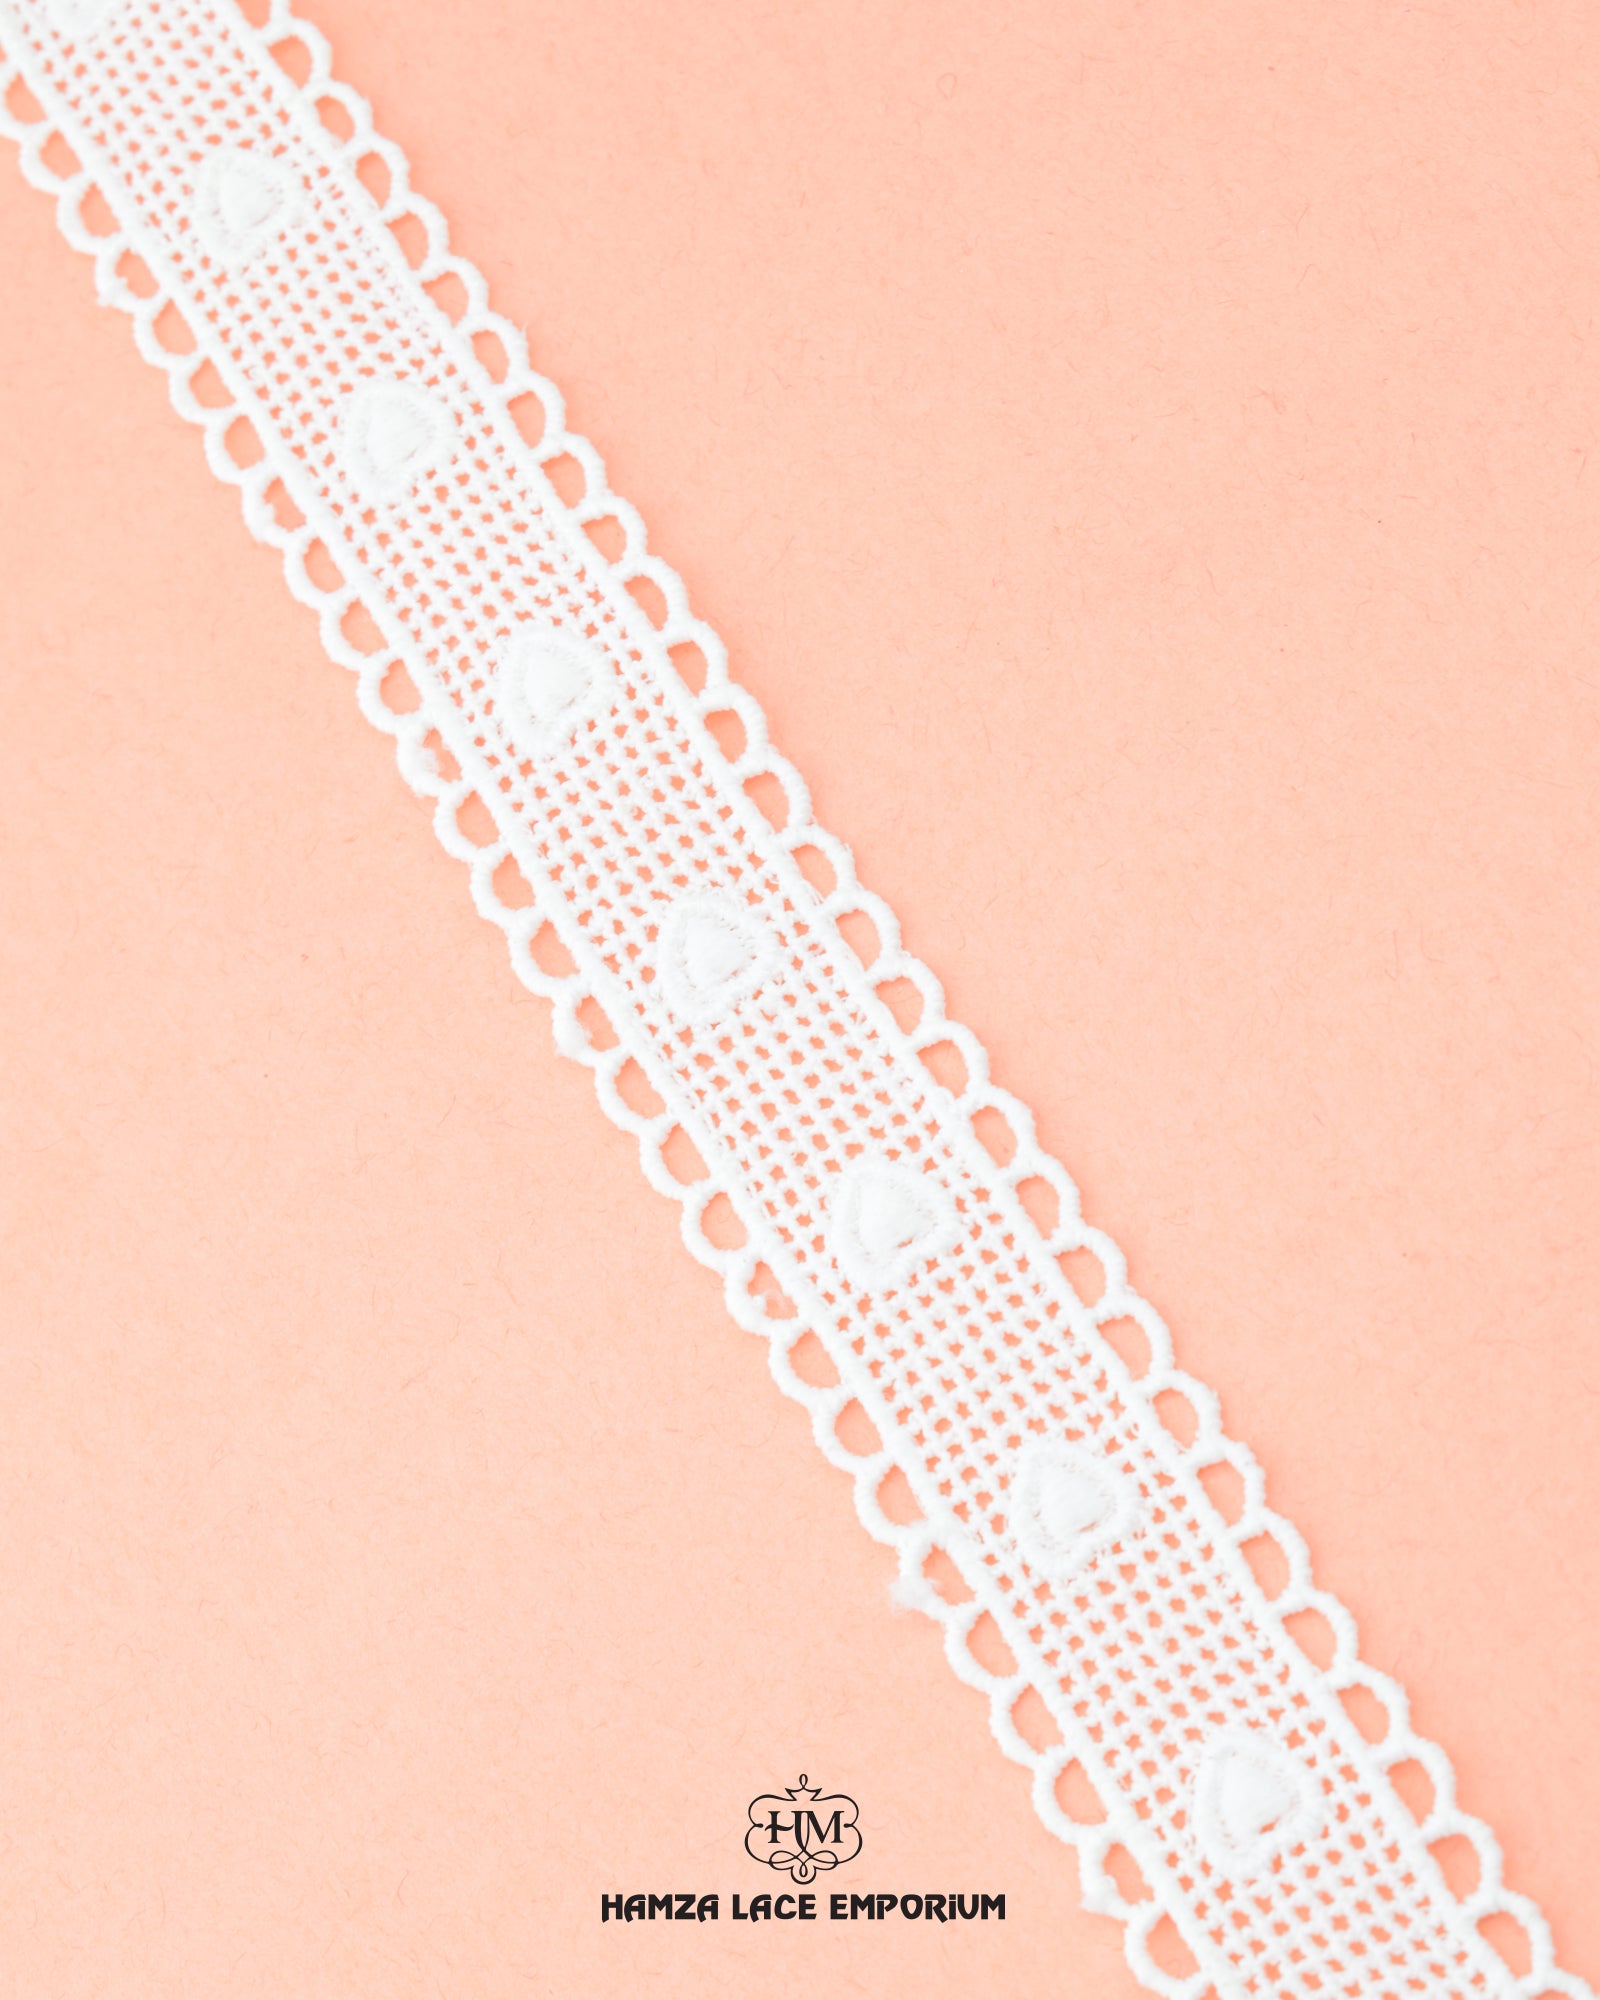 'Center Filling Lace 16087' with the 'Hamza Lace' sign